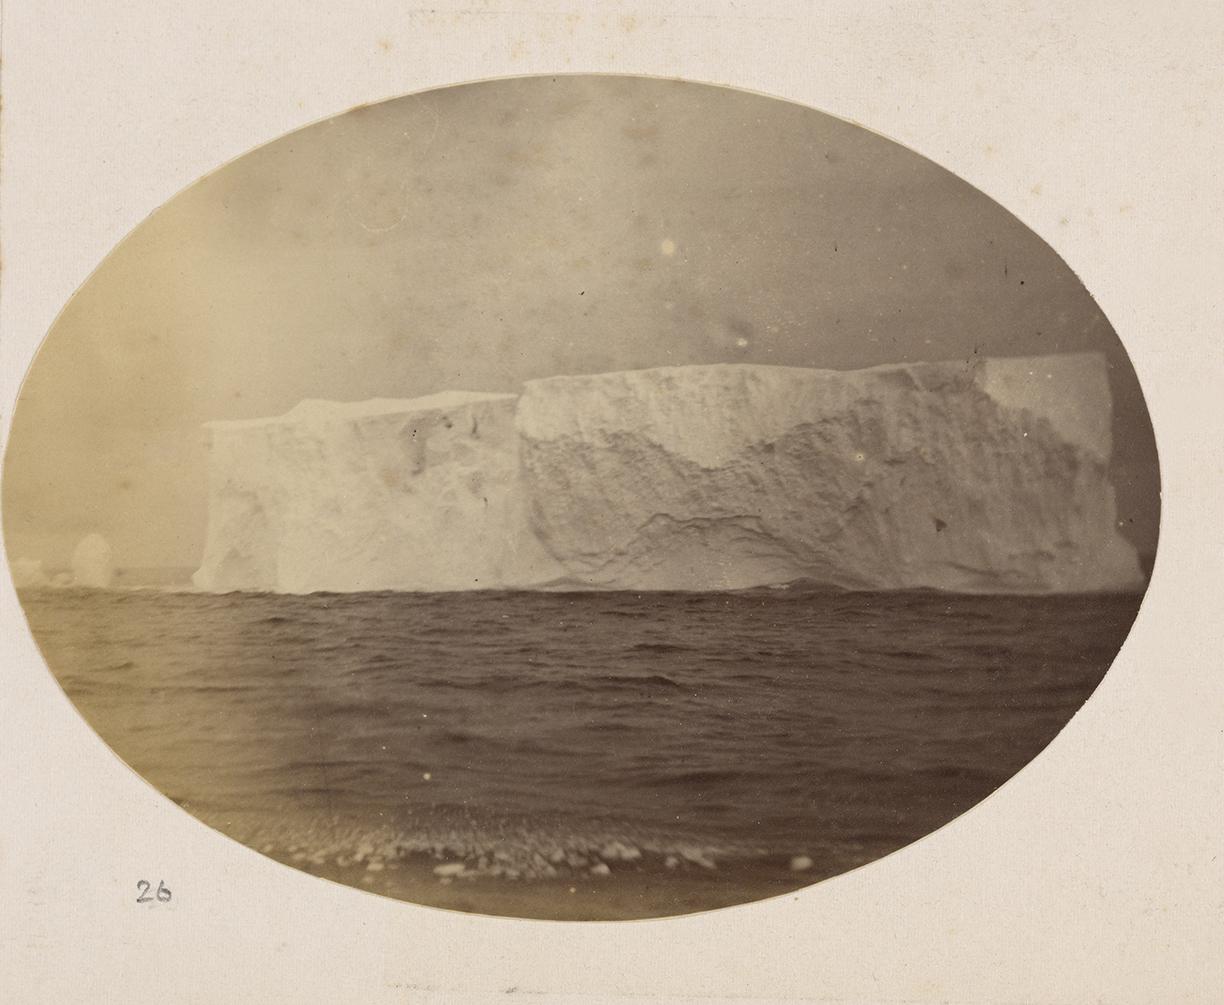 Historic photograph showing an iceberg taken in the South Atlantic, taken from HMS Challenger